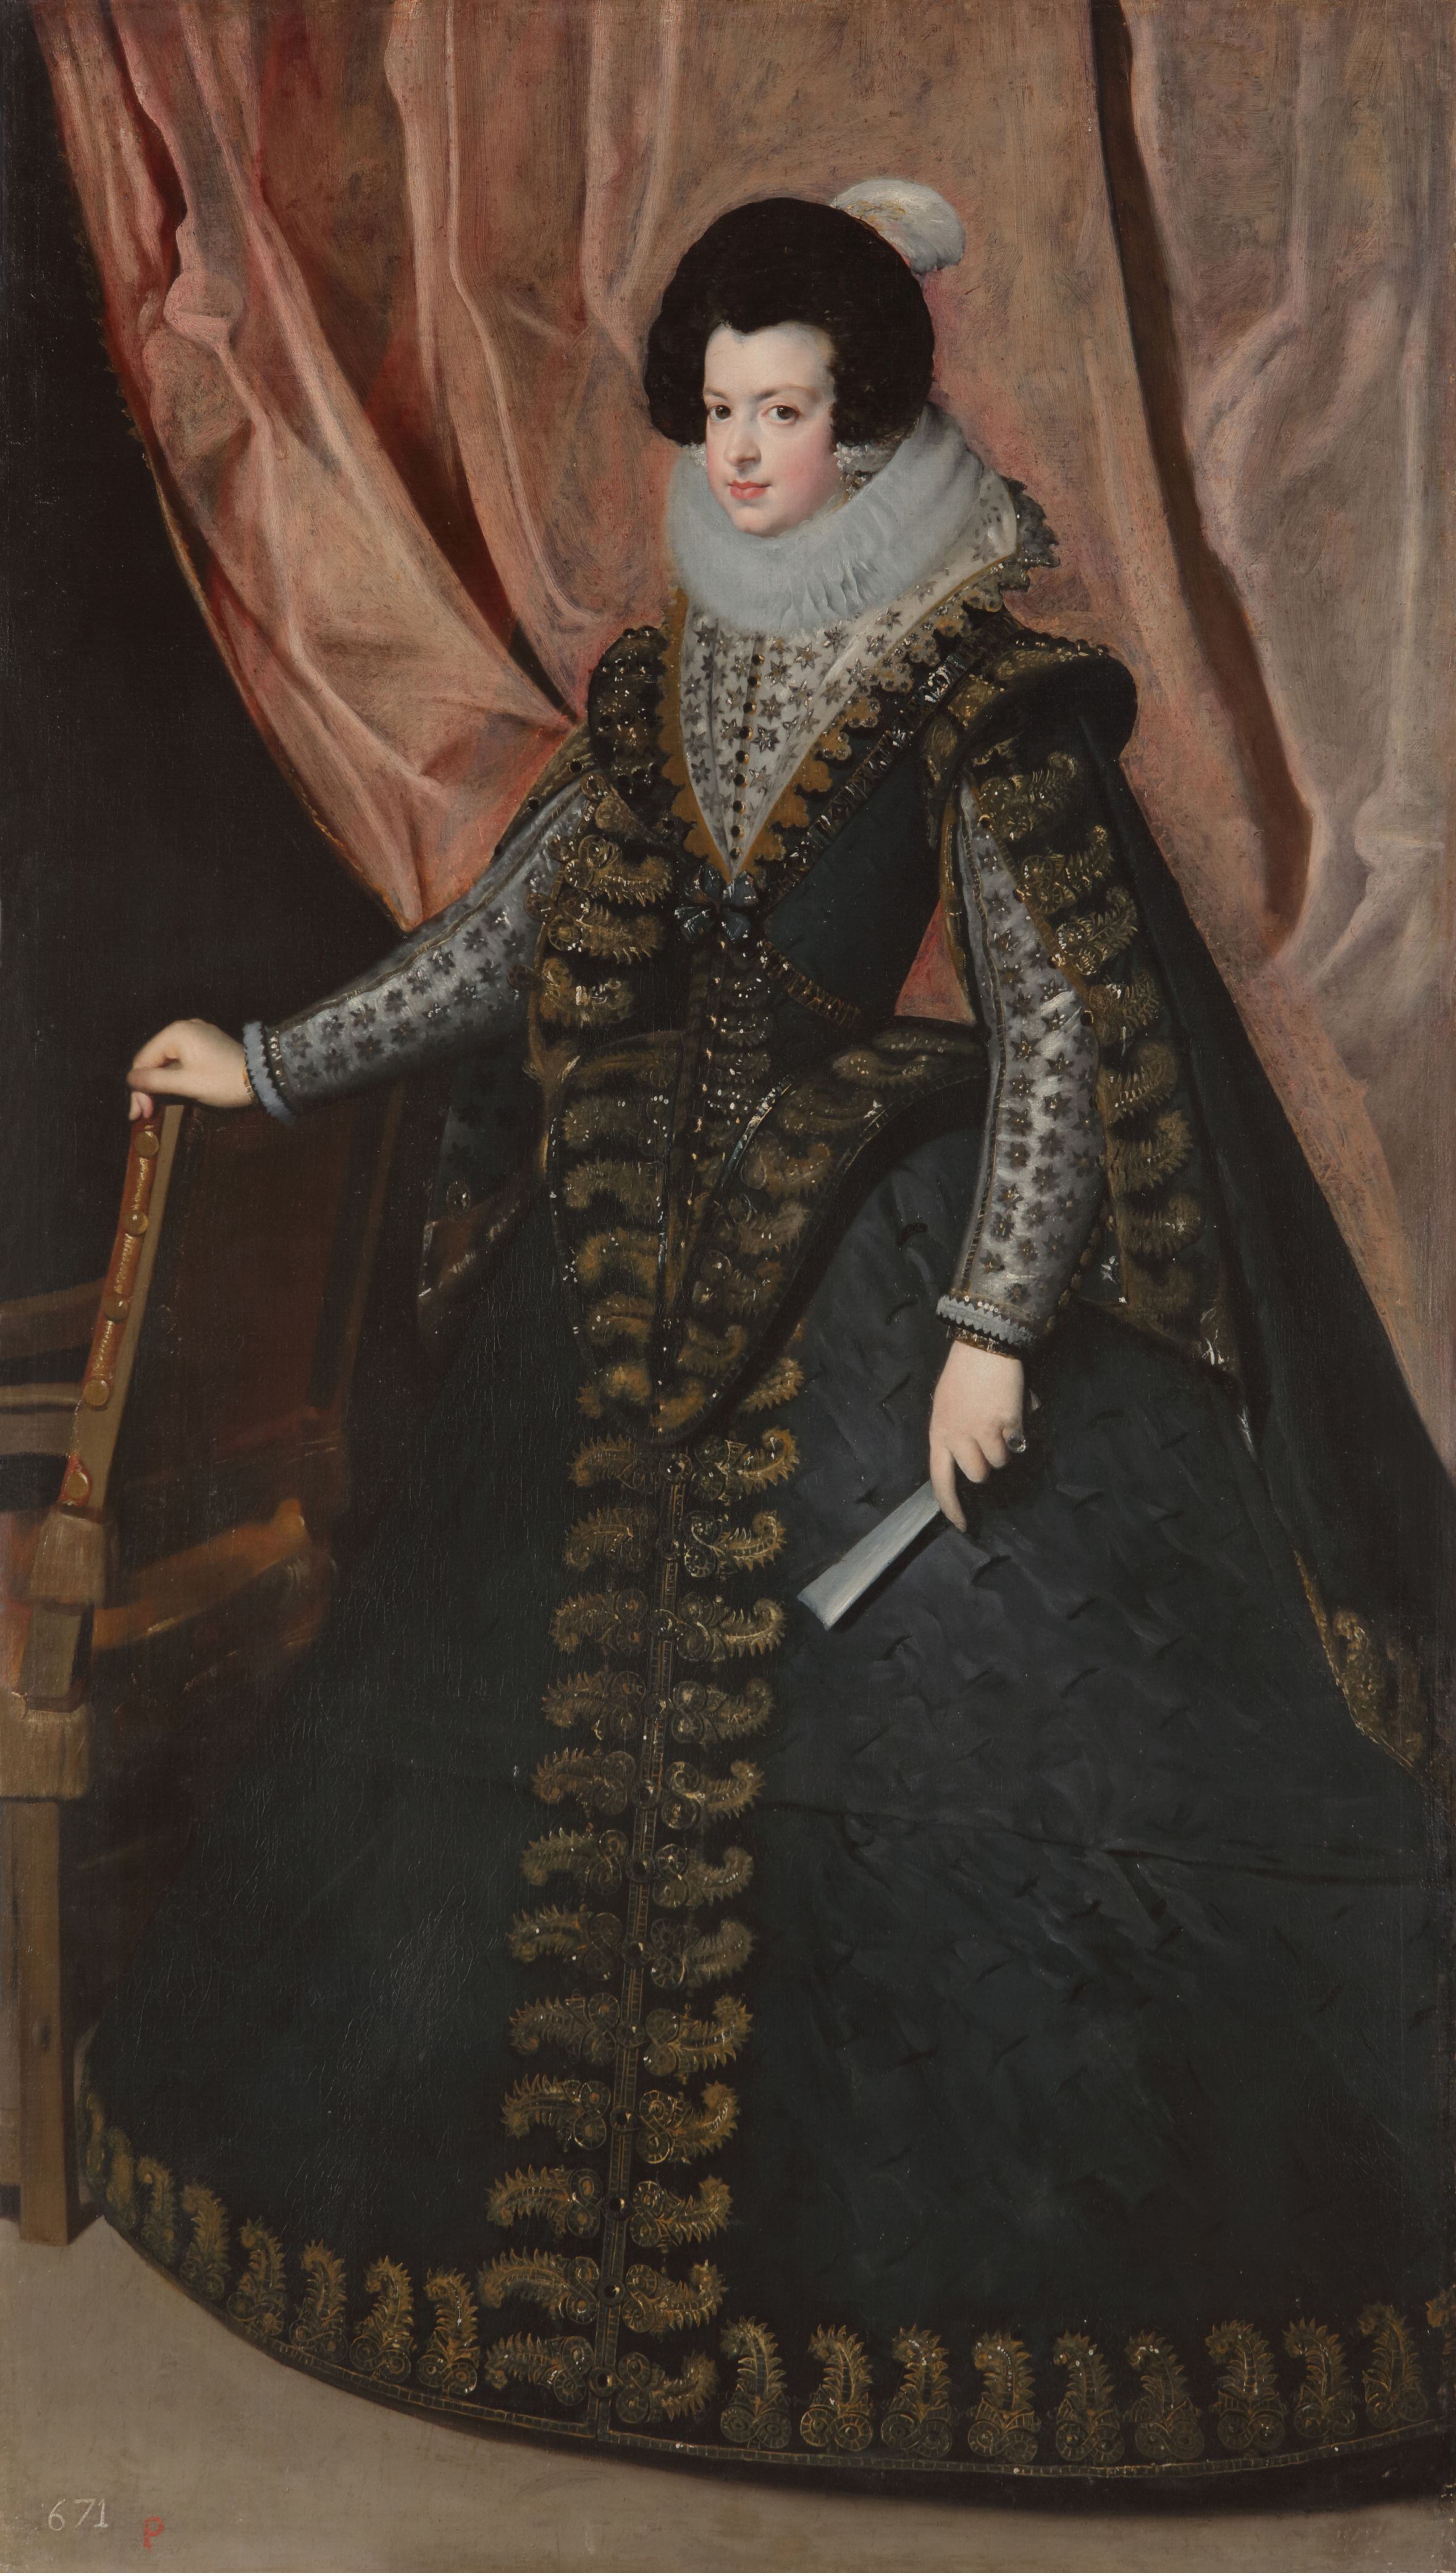 diego velazquez’s queen of spain up for auction with $35 million price tag